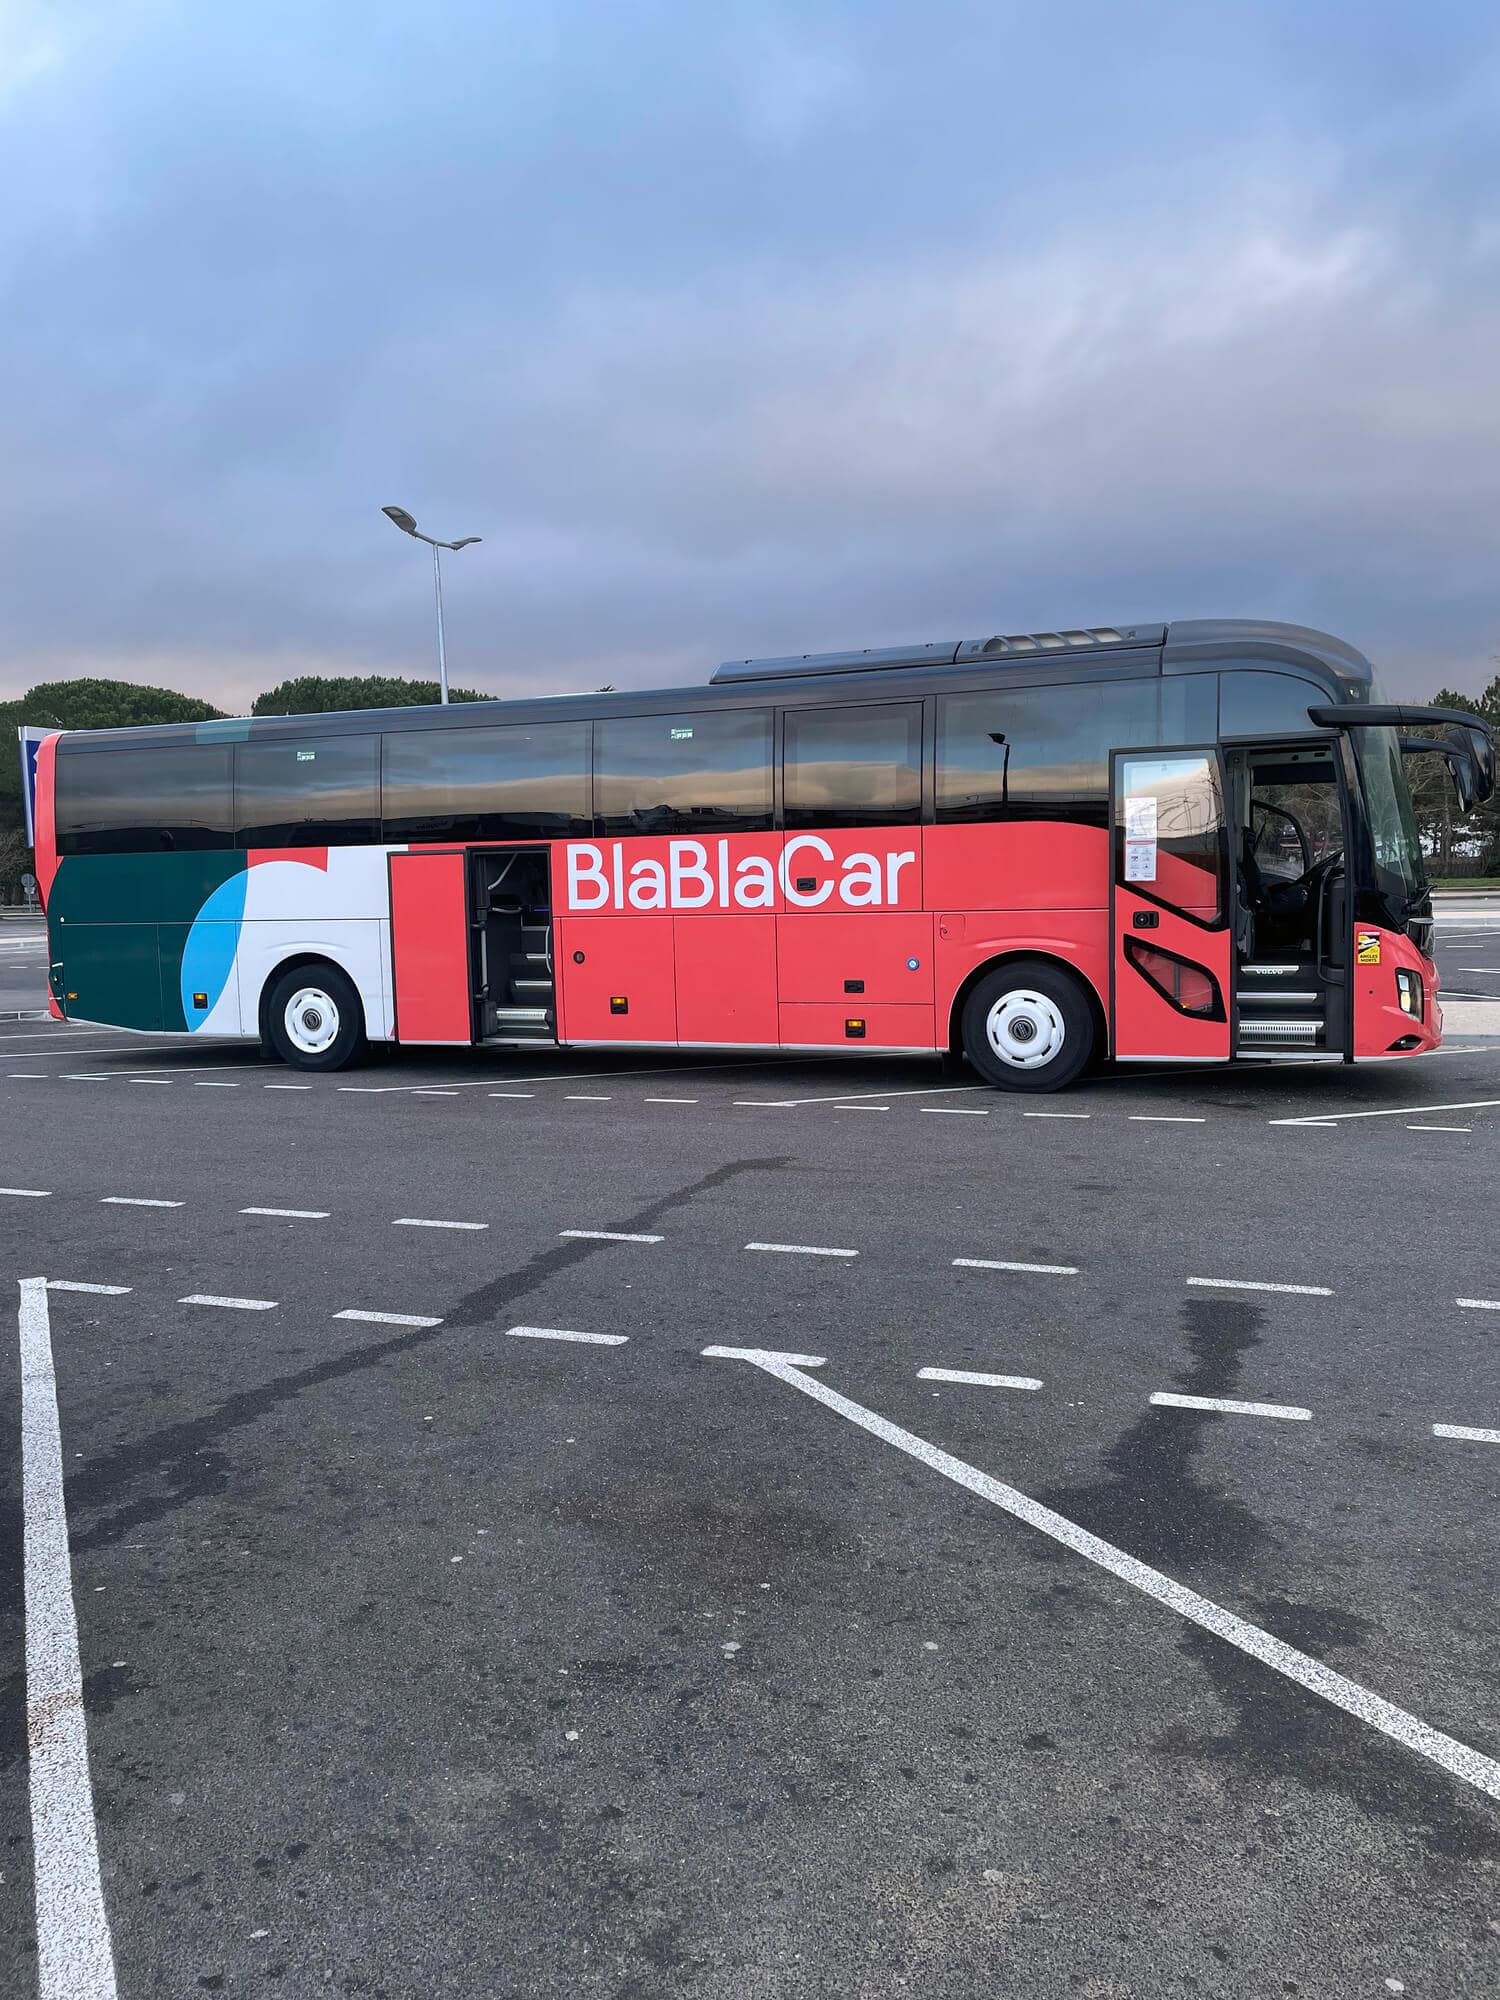 A red, blue and white BlaBlaCar Bus alone on a parking lot at dusk.